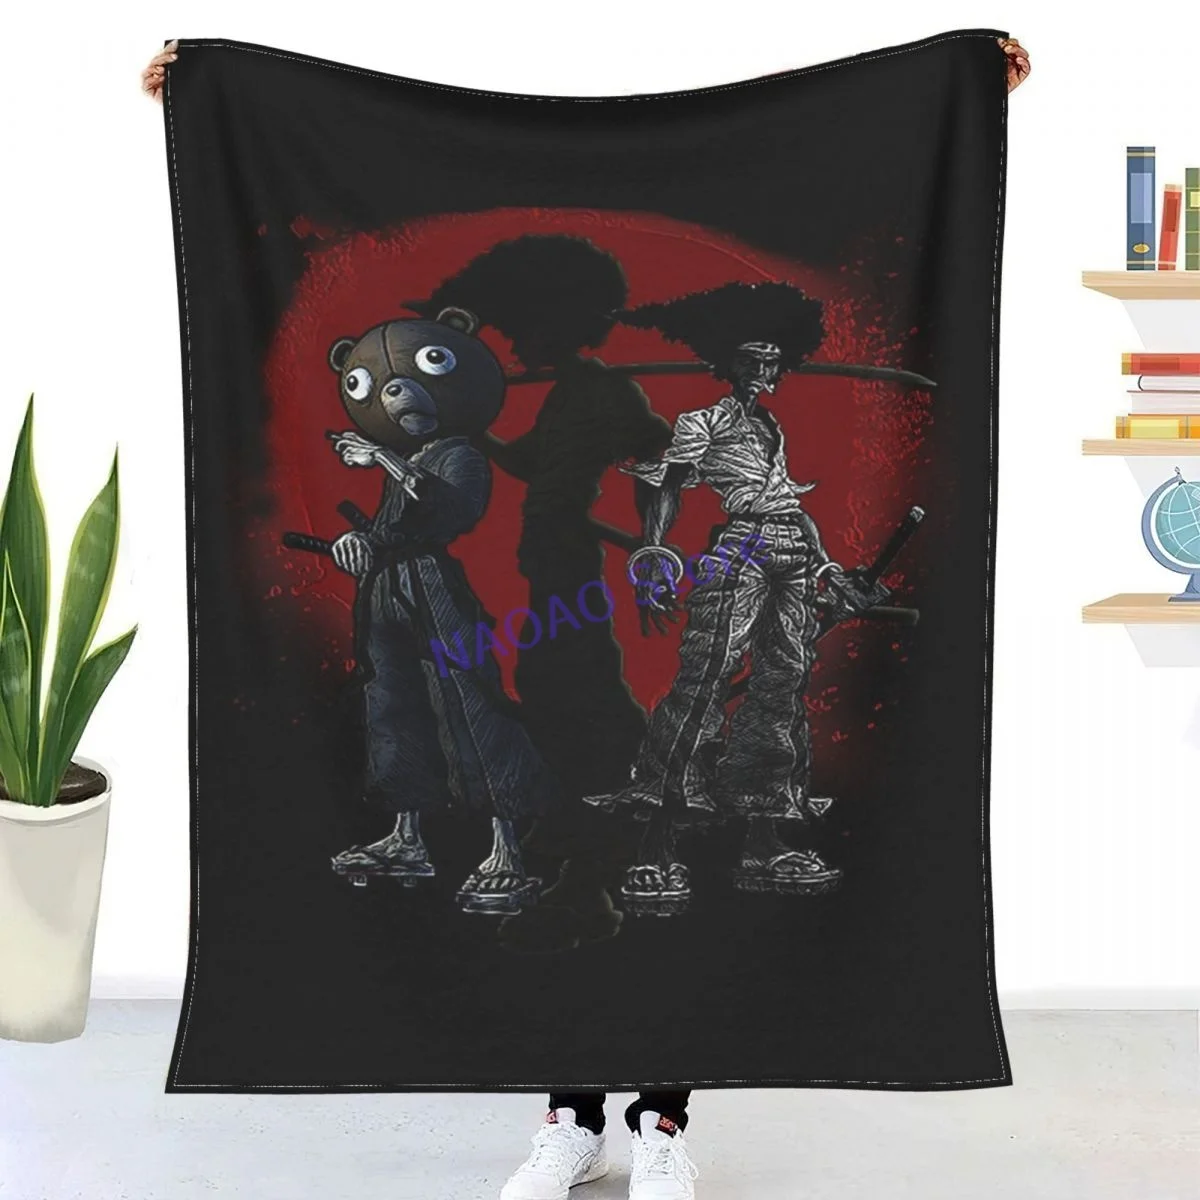 

Anime Afro Samurai T-Shirt Throw Blanket Sheets on the bed Blankets on the sofa Decorative lattice bedspreads Happy nap for